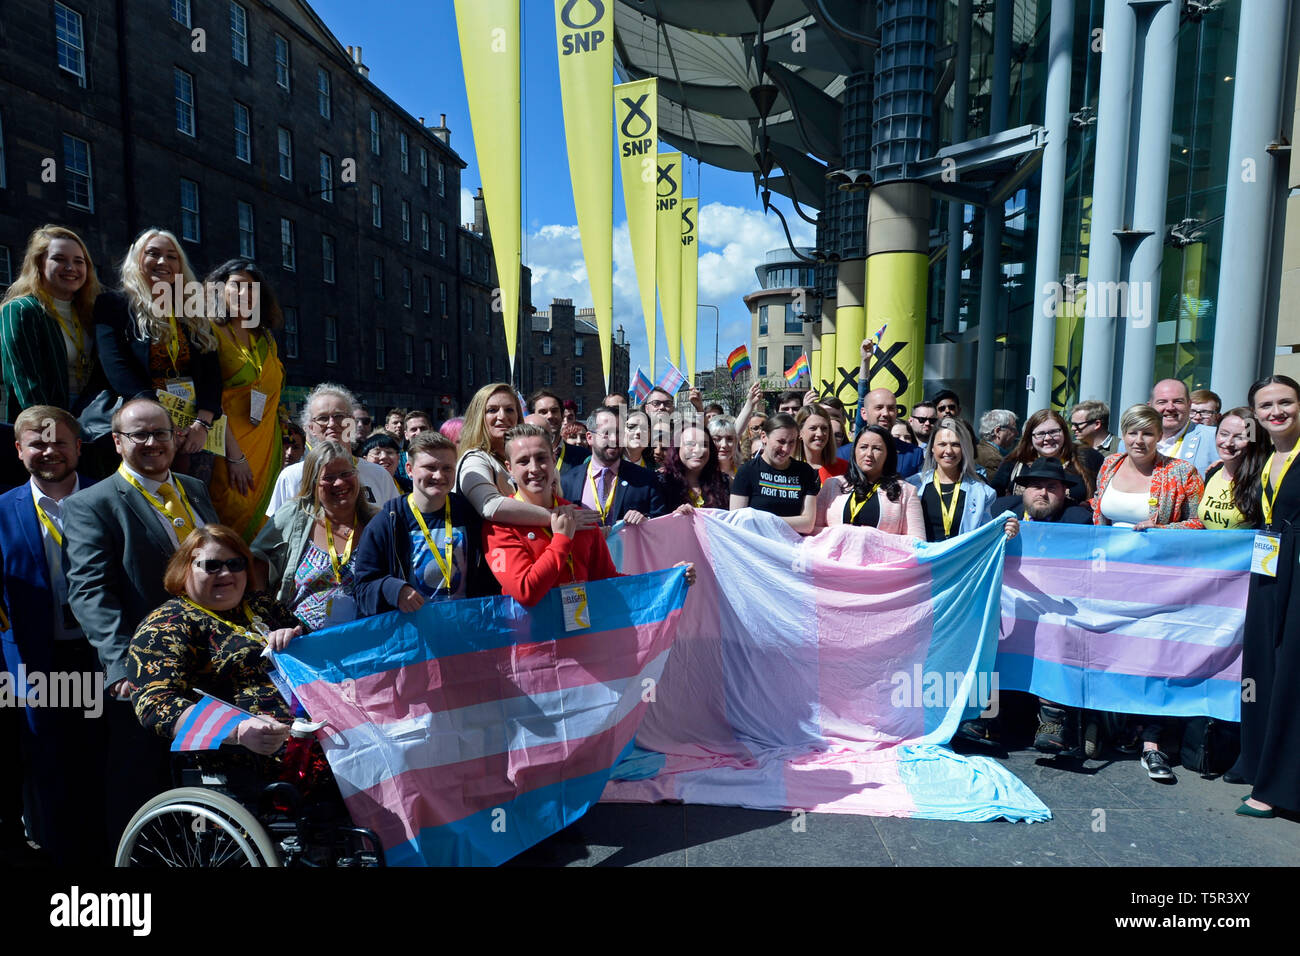 Edinburgh, Scotland, United Kingdom. 27th Apr, 2019. MPs, MSPs, Ministers, party delegates, and campaigners, gather in a show of solidarity with the transgender community, outside the Edinburgh International Conference Centre where the SNP Spring Conference is taking place. Credit: Ken Jack/Alamy Live News Stock Photo